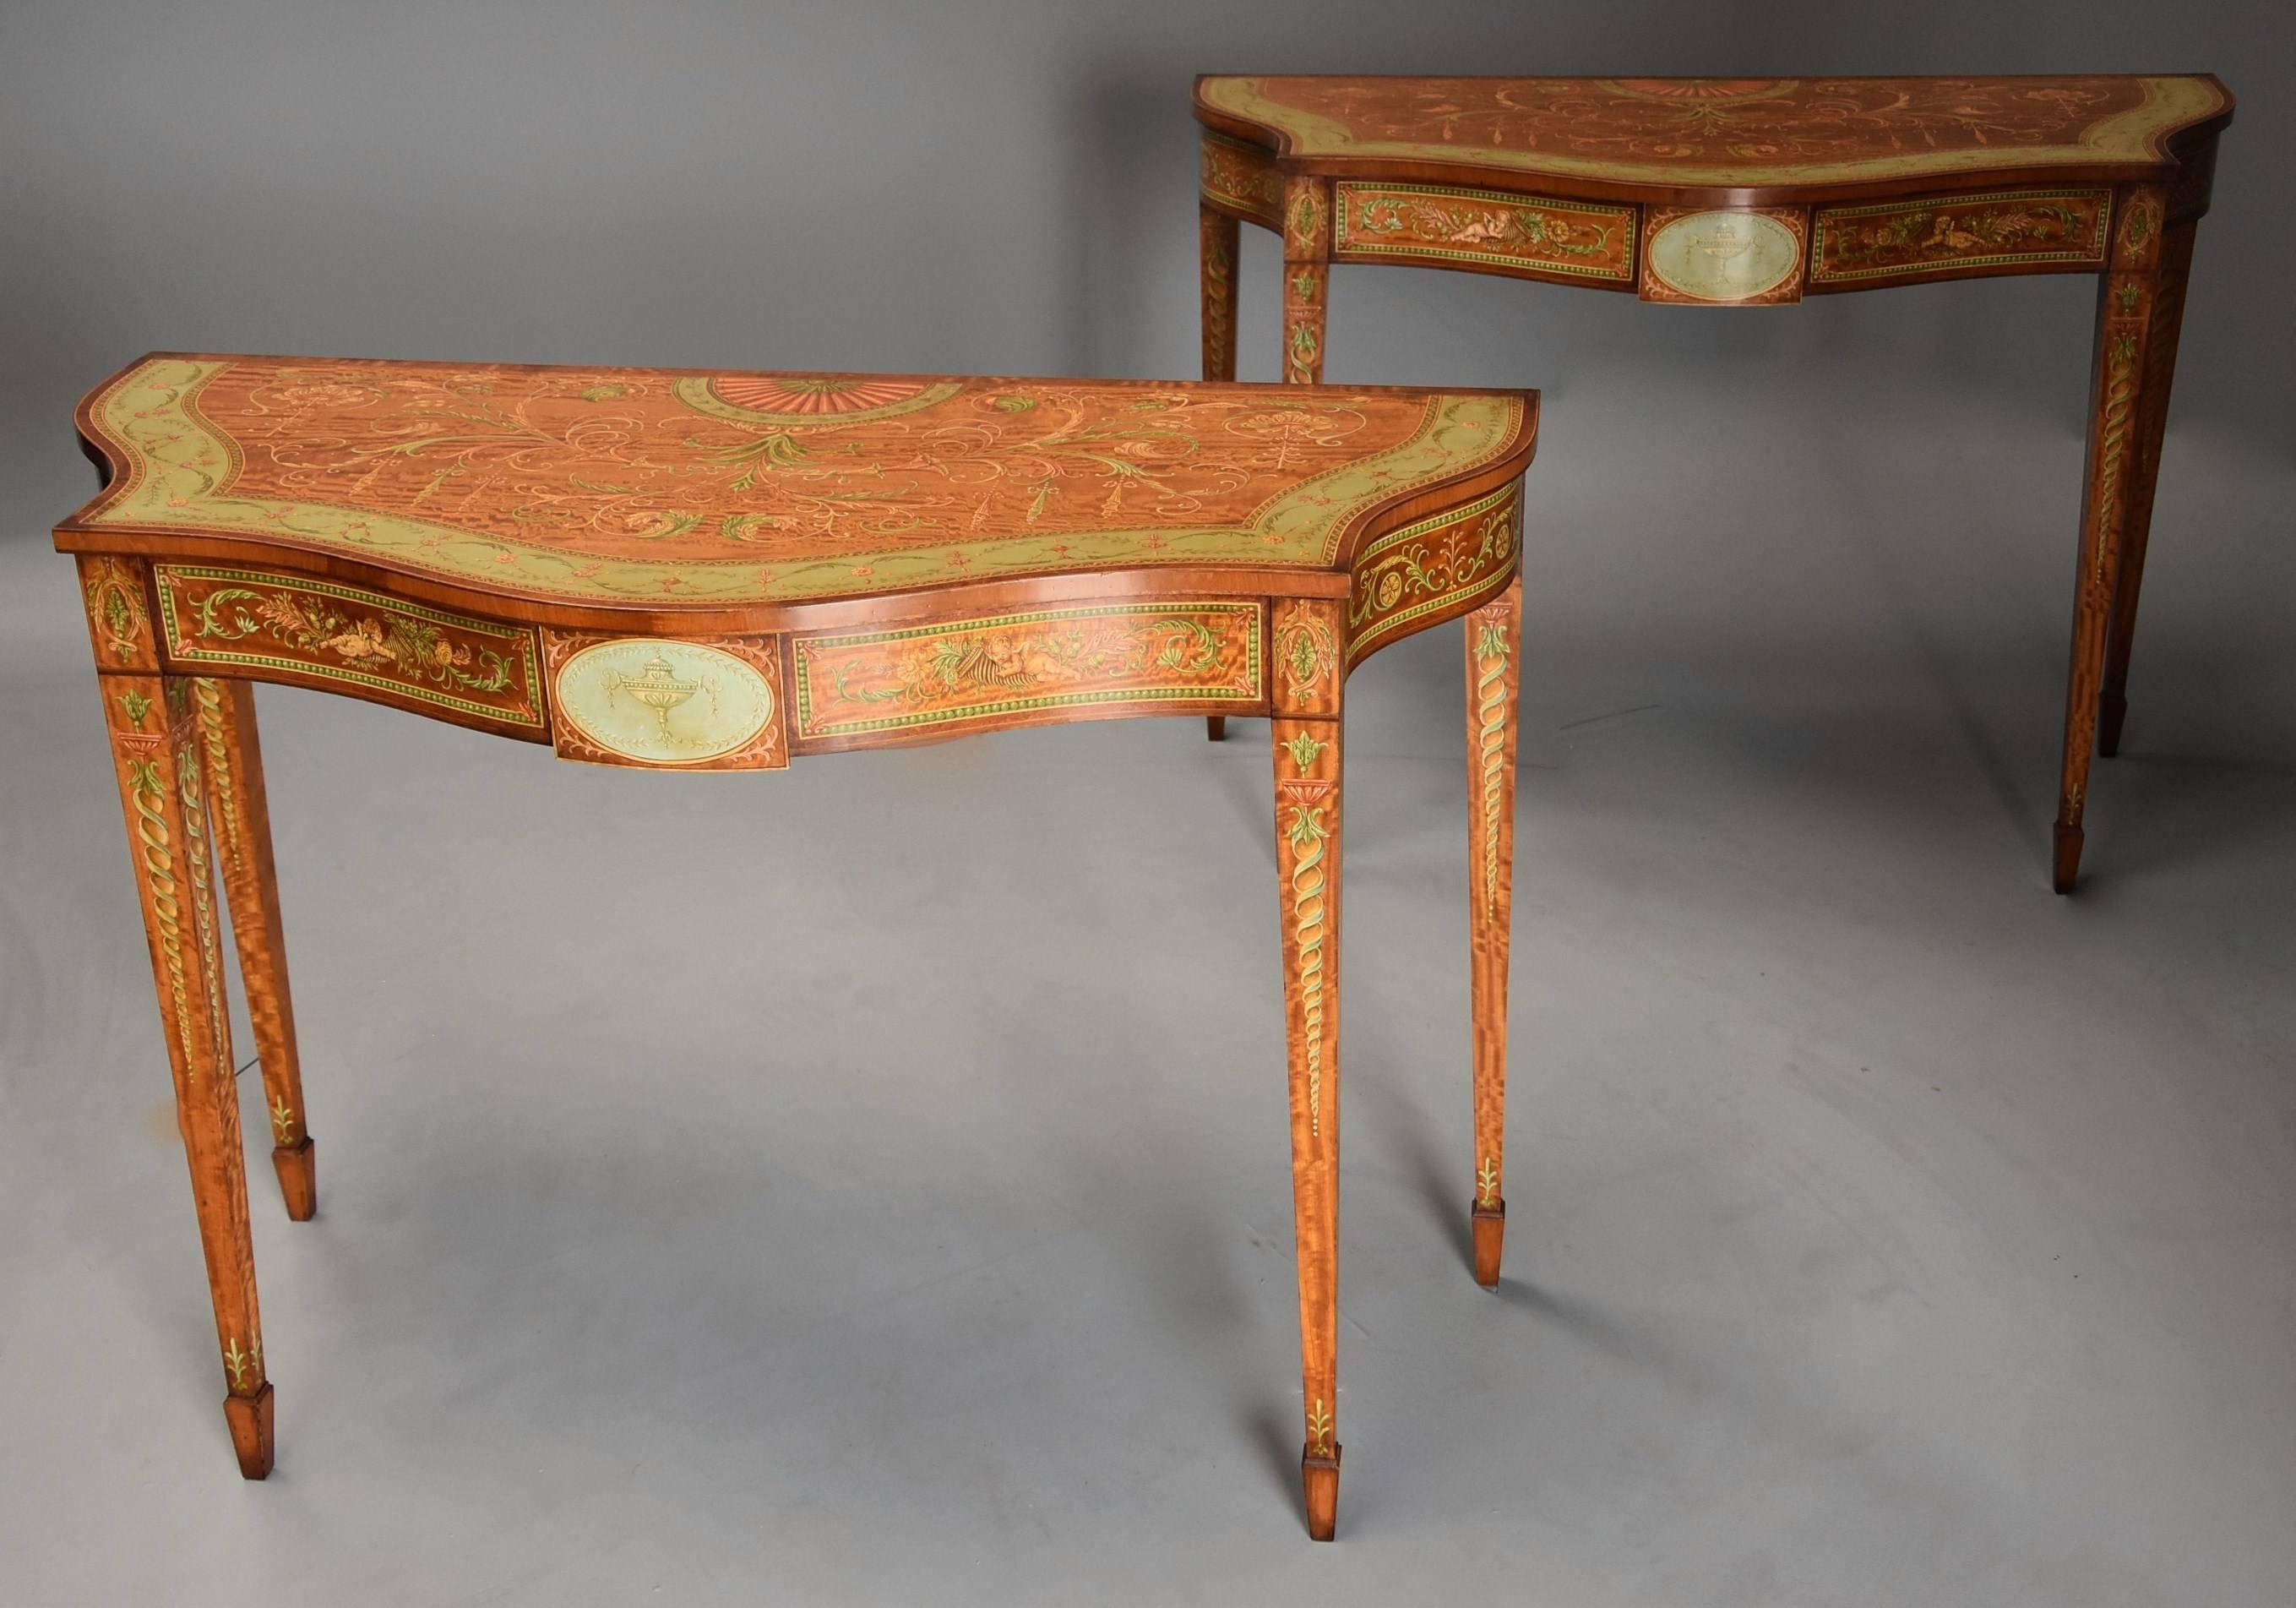 A superb pair of Sheraton revival highly decorative satinwood and painted serpentine shaped console tables.

This pair of tables consist of superb and finely painted satinwood tops of typical Adam style Classical decoration including fan,